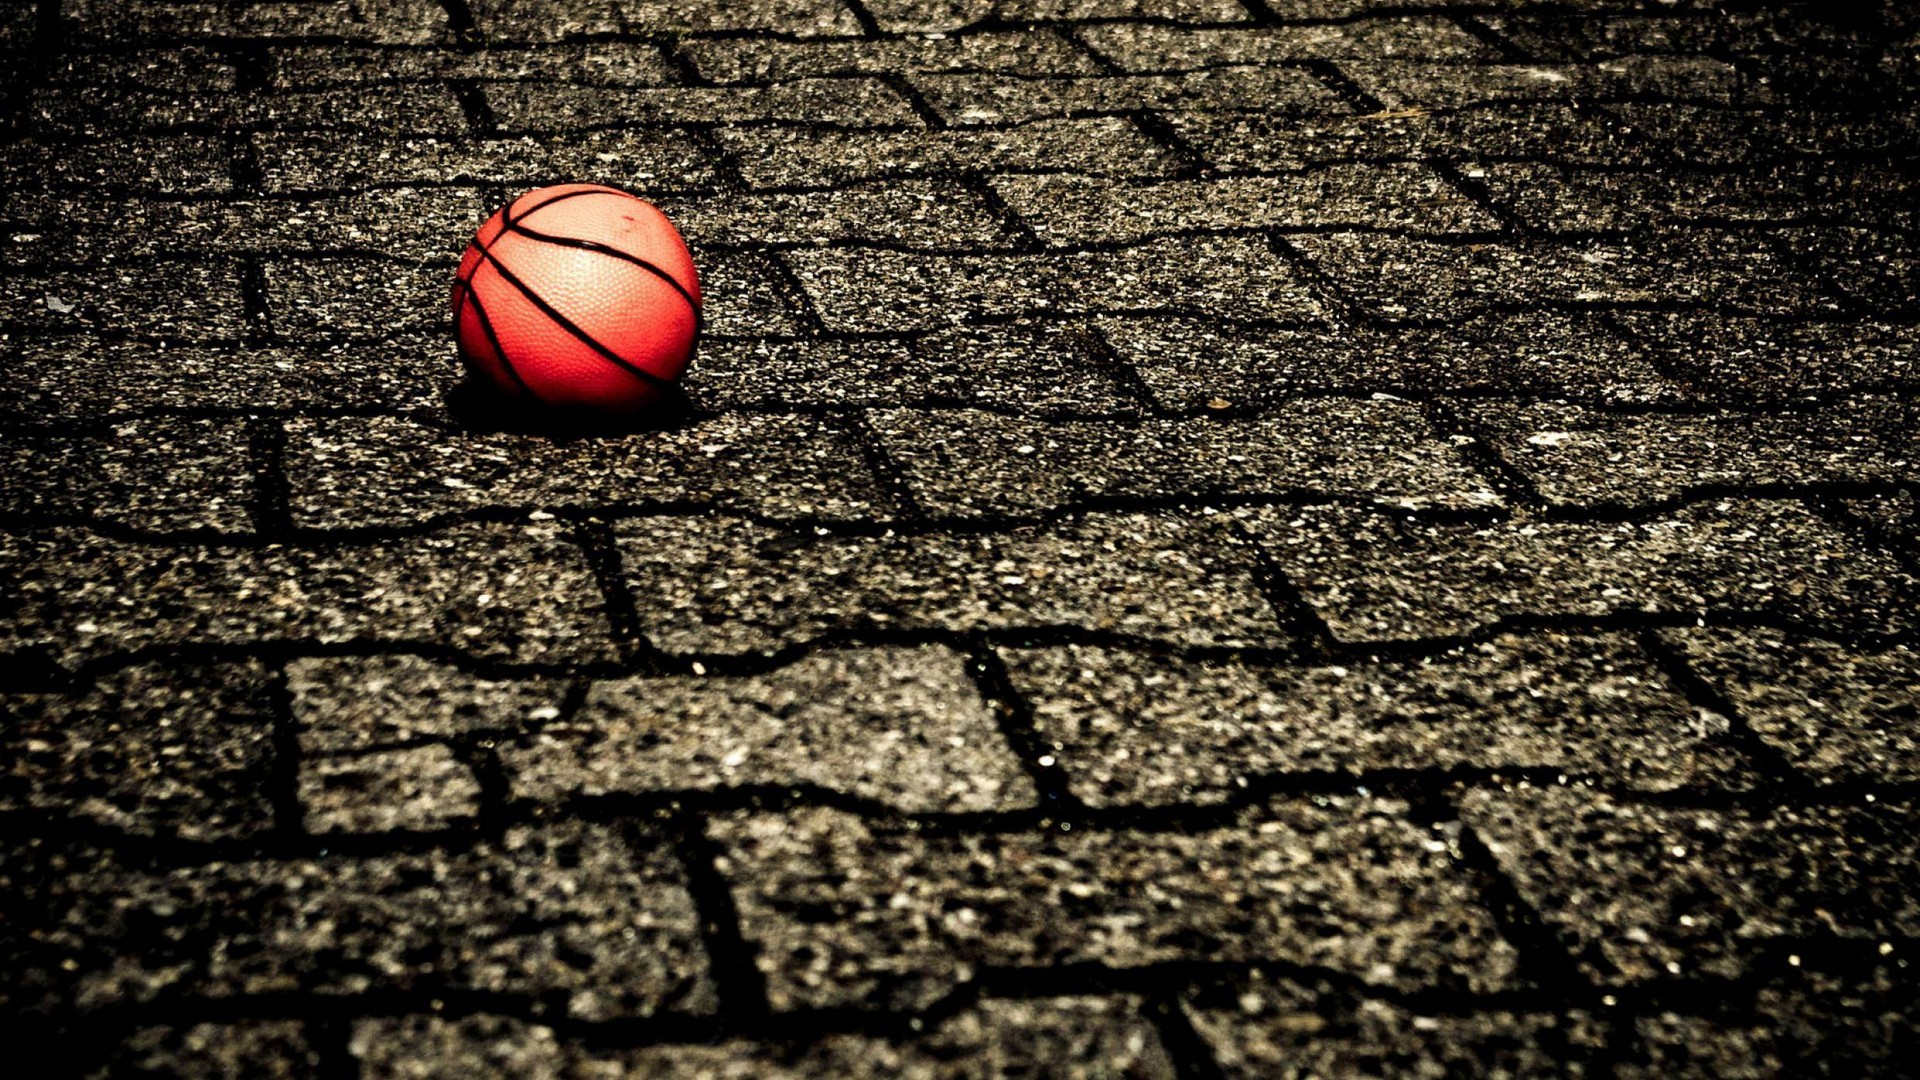 Basketball Wallpaper For Mac Backgrounds with image dimensions 1920X1080 pixel. You can make this wallpaper for your Desktop Computer Backgrounds, Windows or Mac Screensavers, iPhone Lock screen, Tablet or Android and another Mobile Phone device